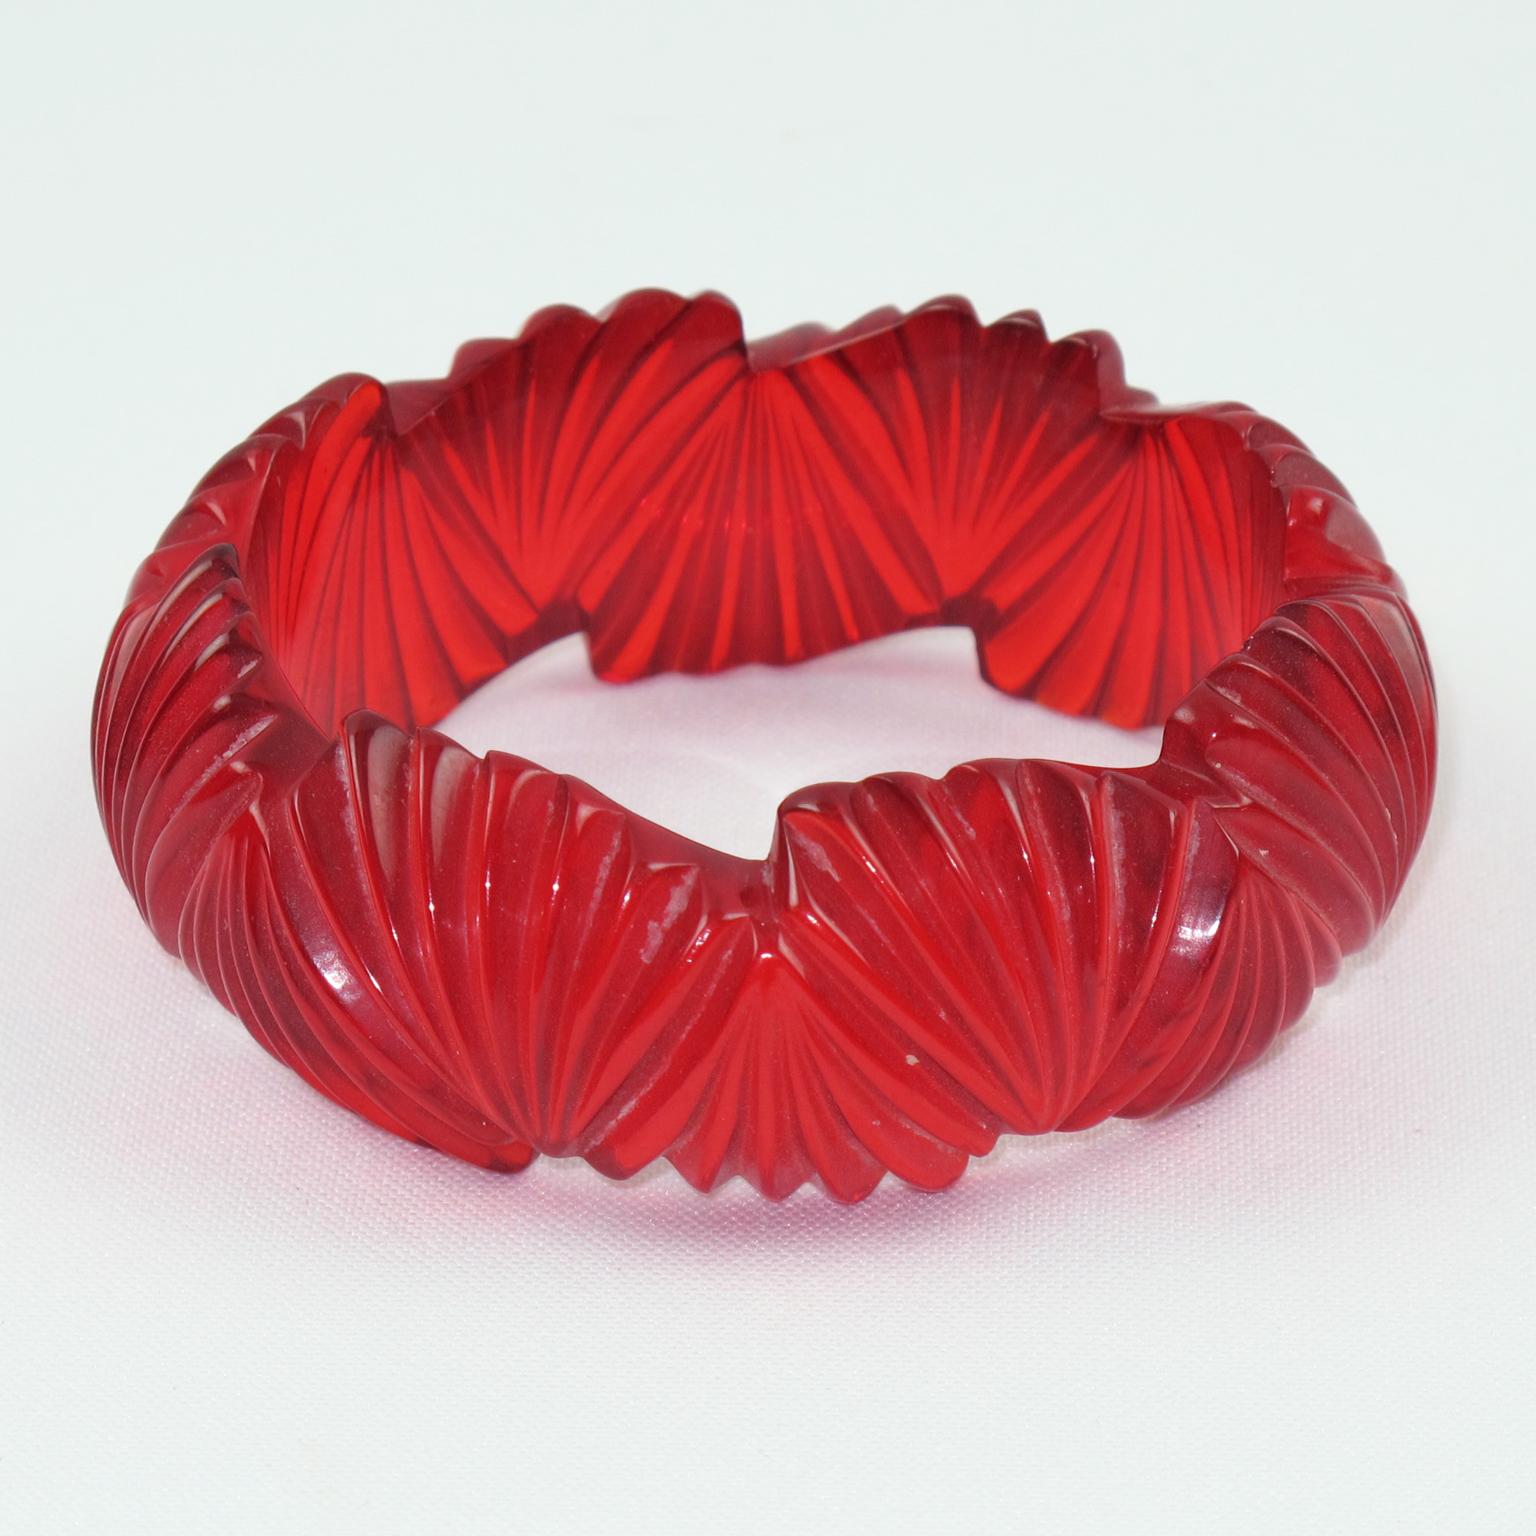 Gorgeous candy apple red Bakelite bracelet bangle. Chunky domed shape with fan deeply carved design all around. Beautiful Prystal quality Bakelite, with fully transparent candy apple red color and purple overtone on edges. 
This Prystal quality